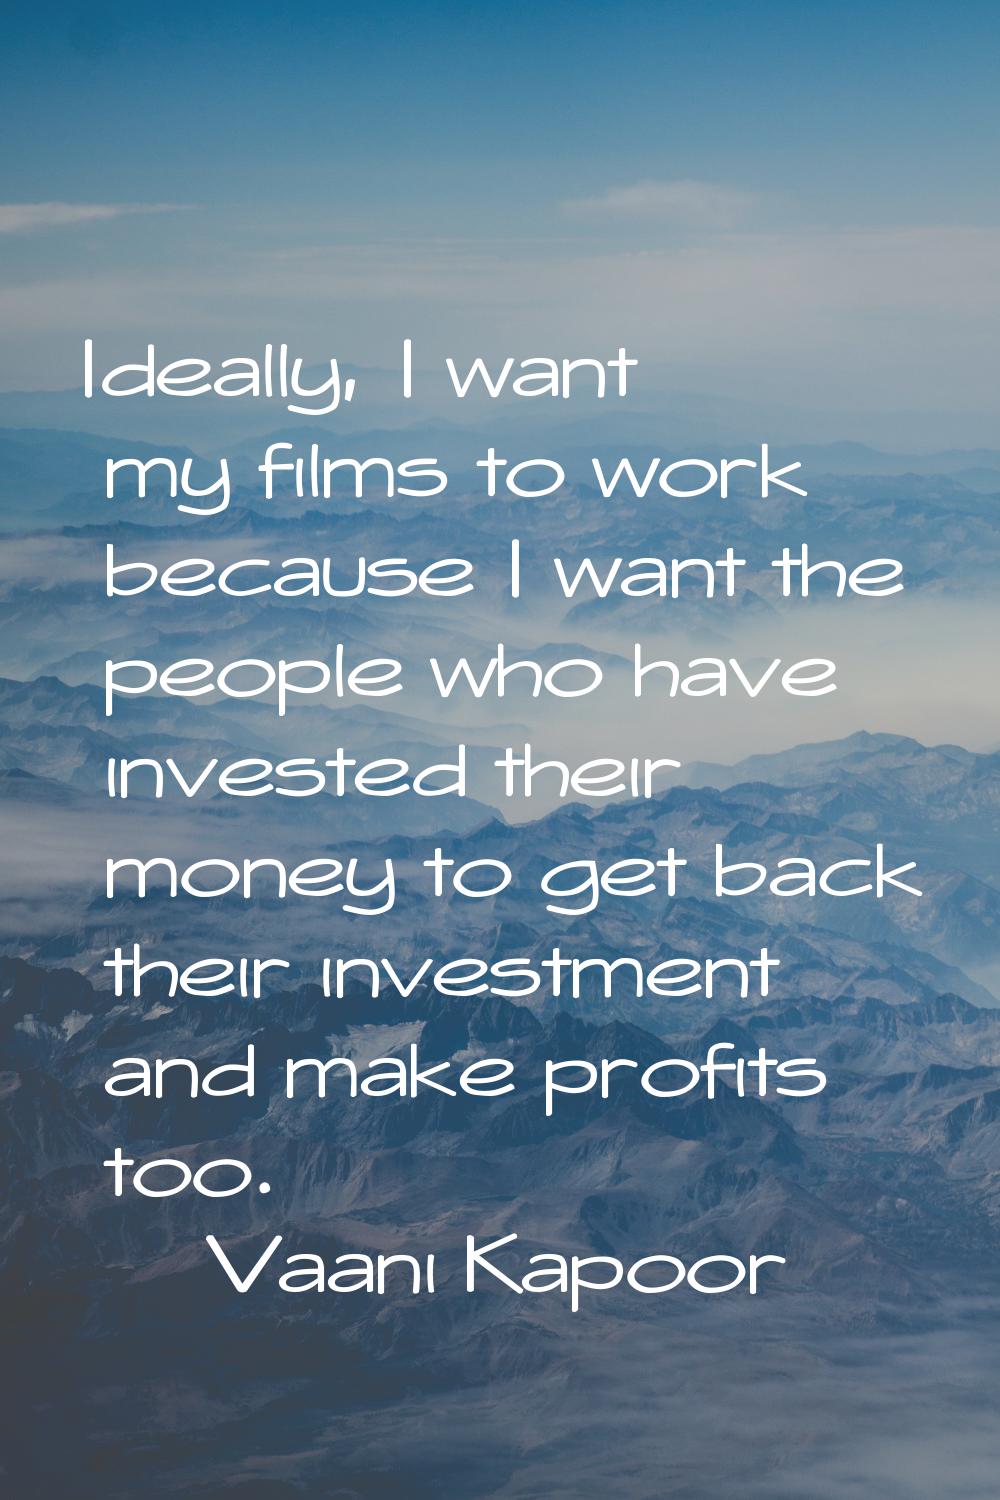 Ideally, I want my films to work because I want the people who have invested their money to get bac